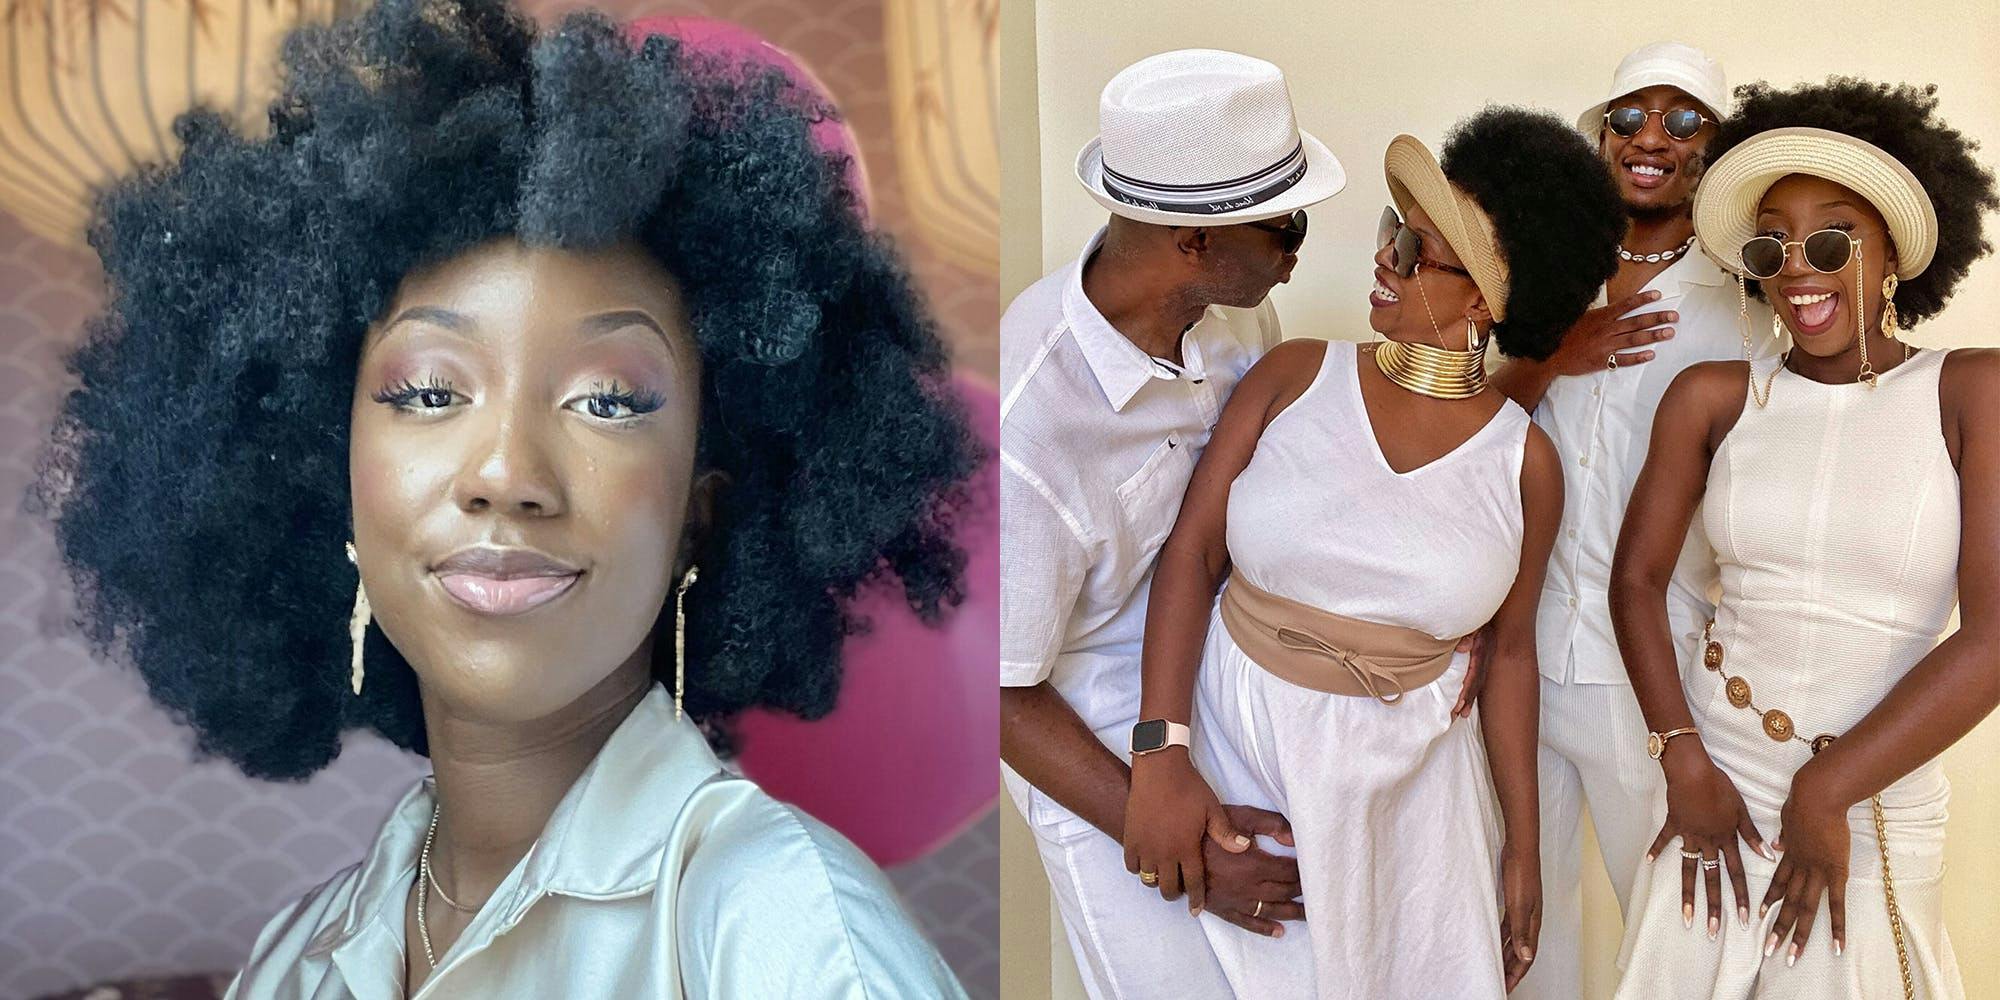 Meet Queen Motivat, the ‘wholesome’ CEO with 968,000 TikTok followers